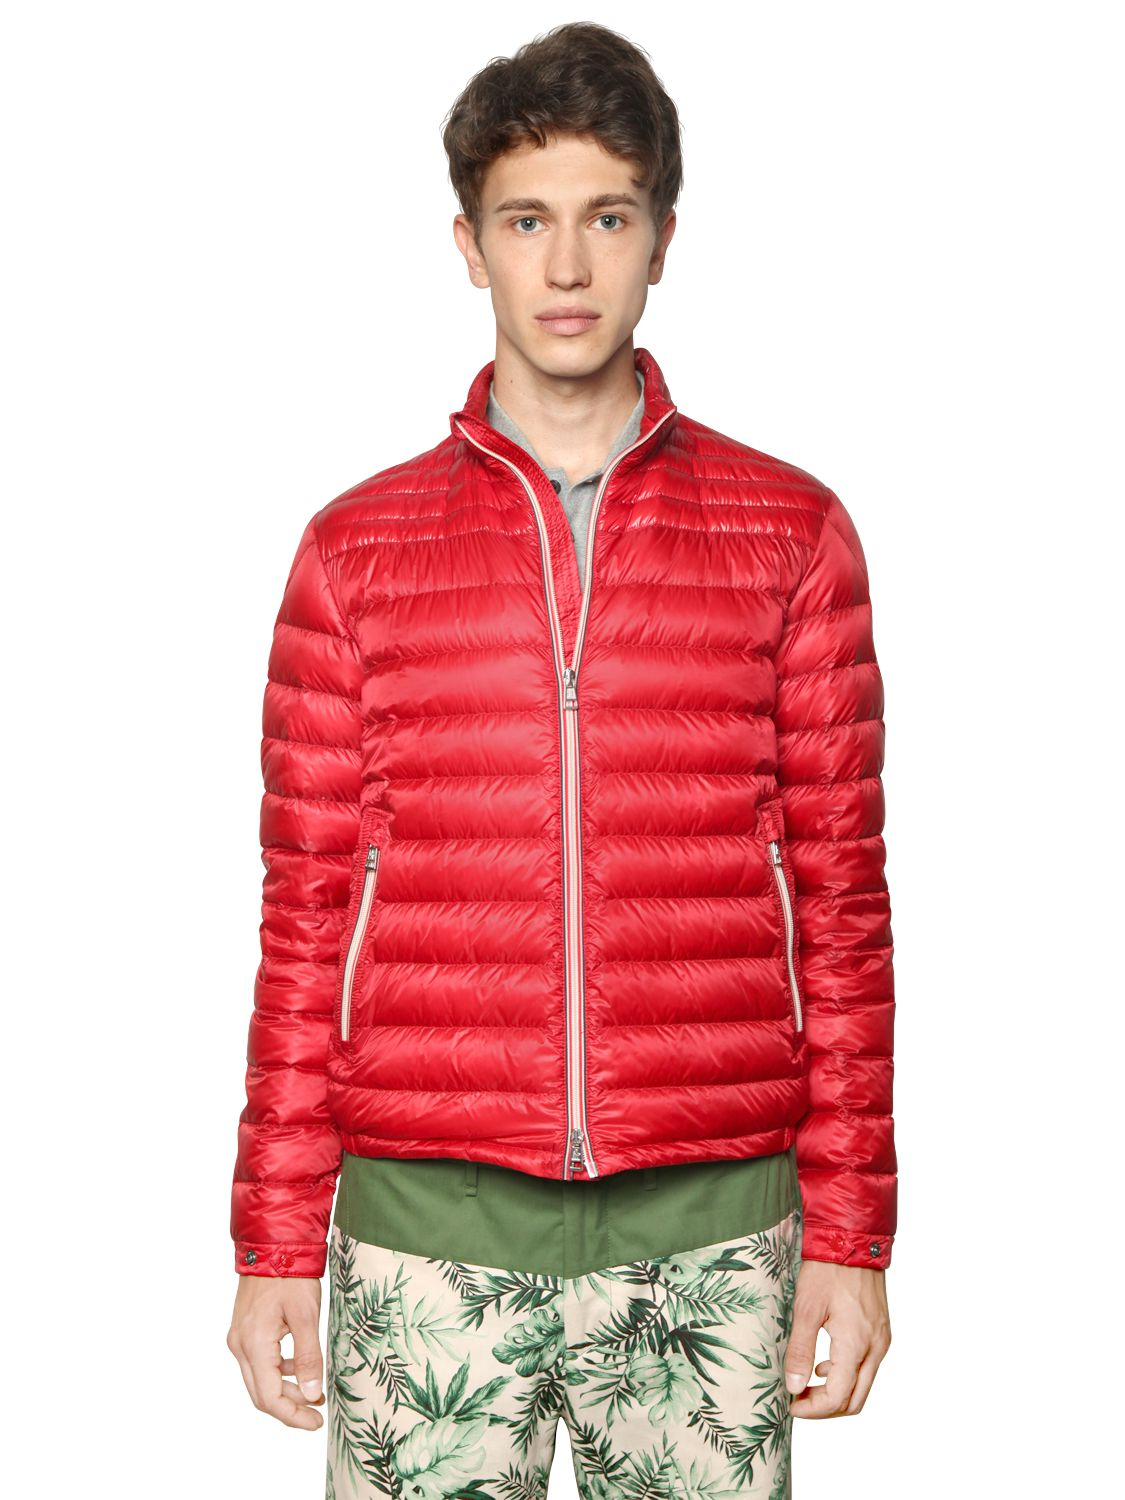 moncler daniel jacket red, OFF 79%,Cheap price!